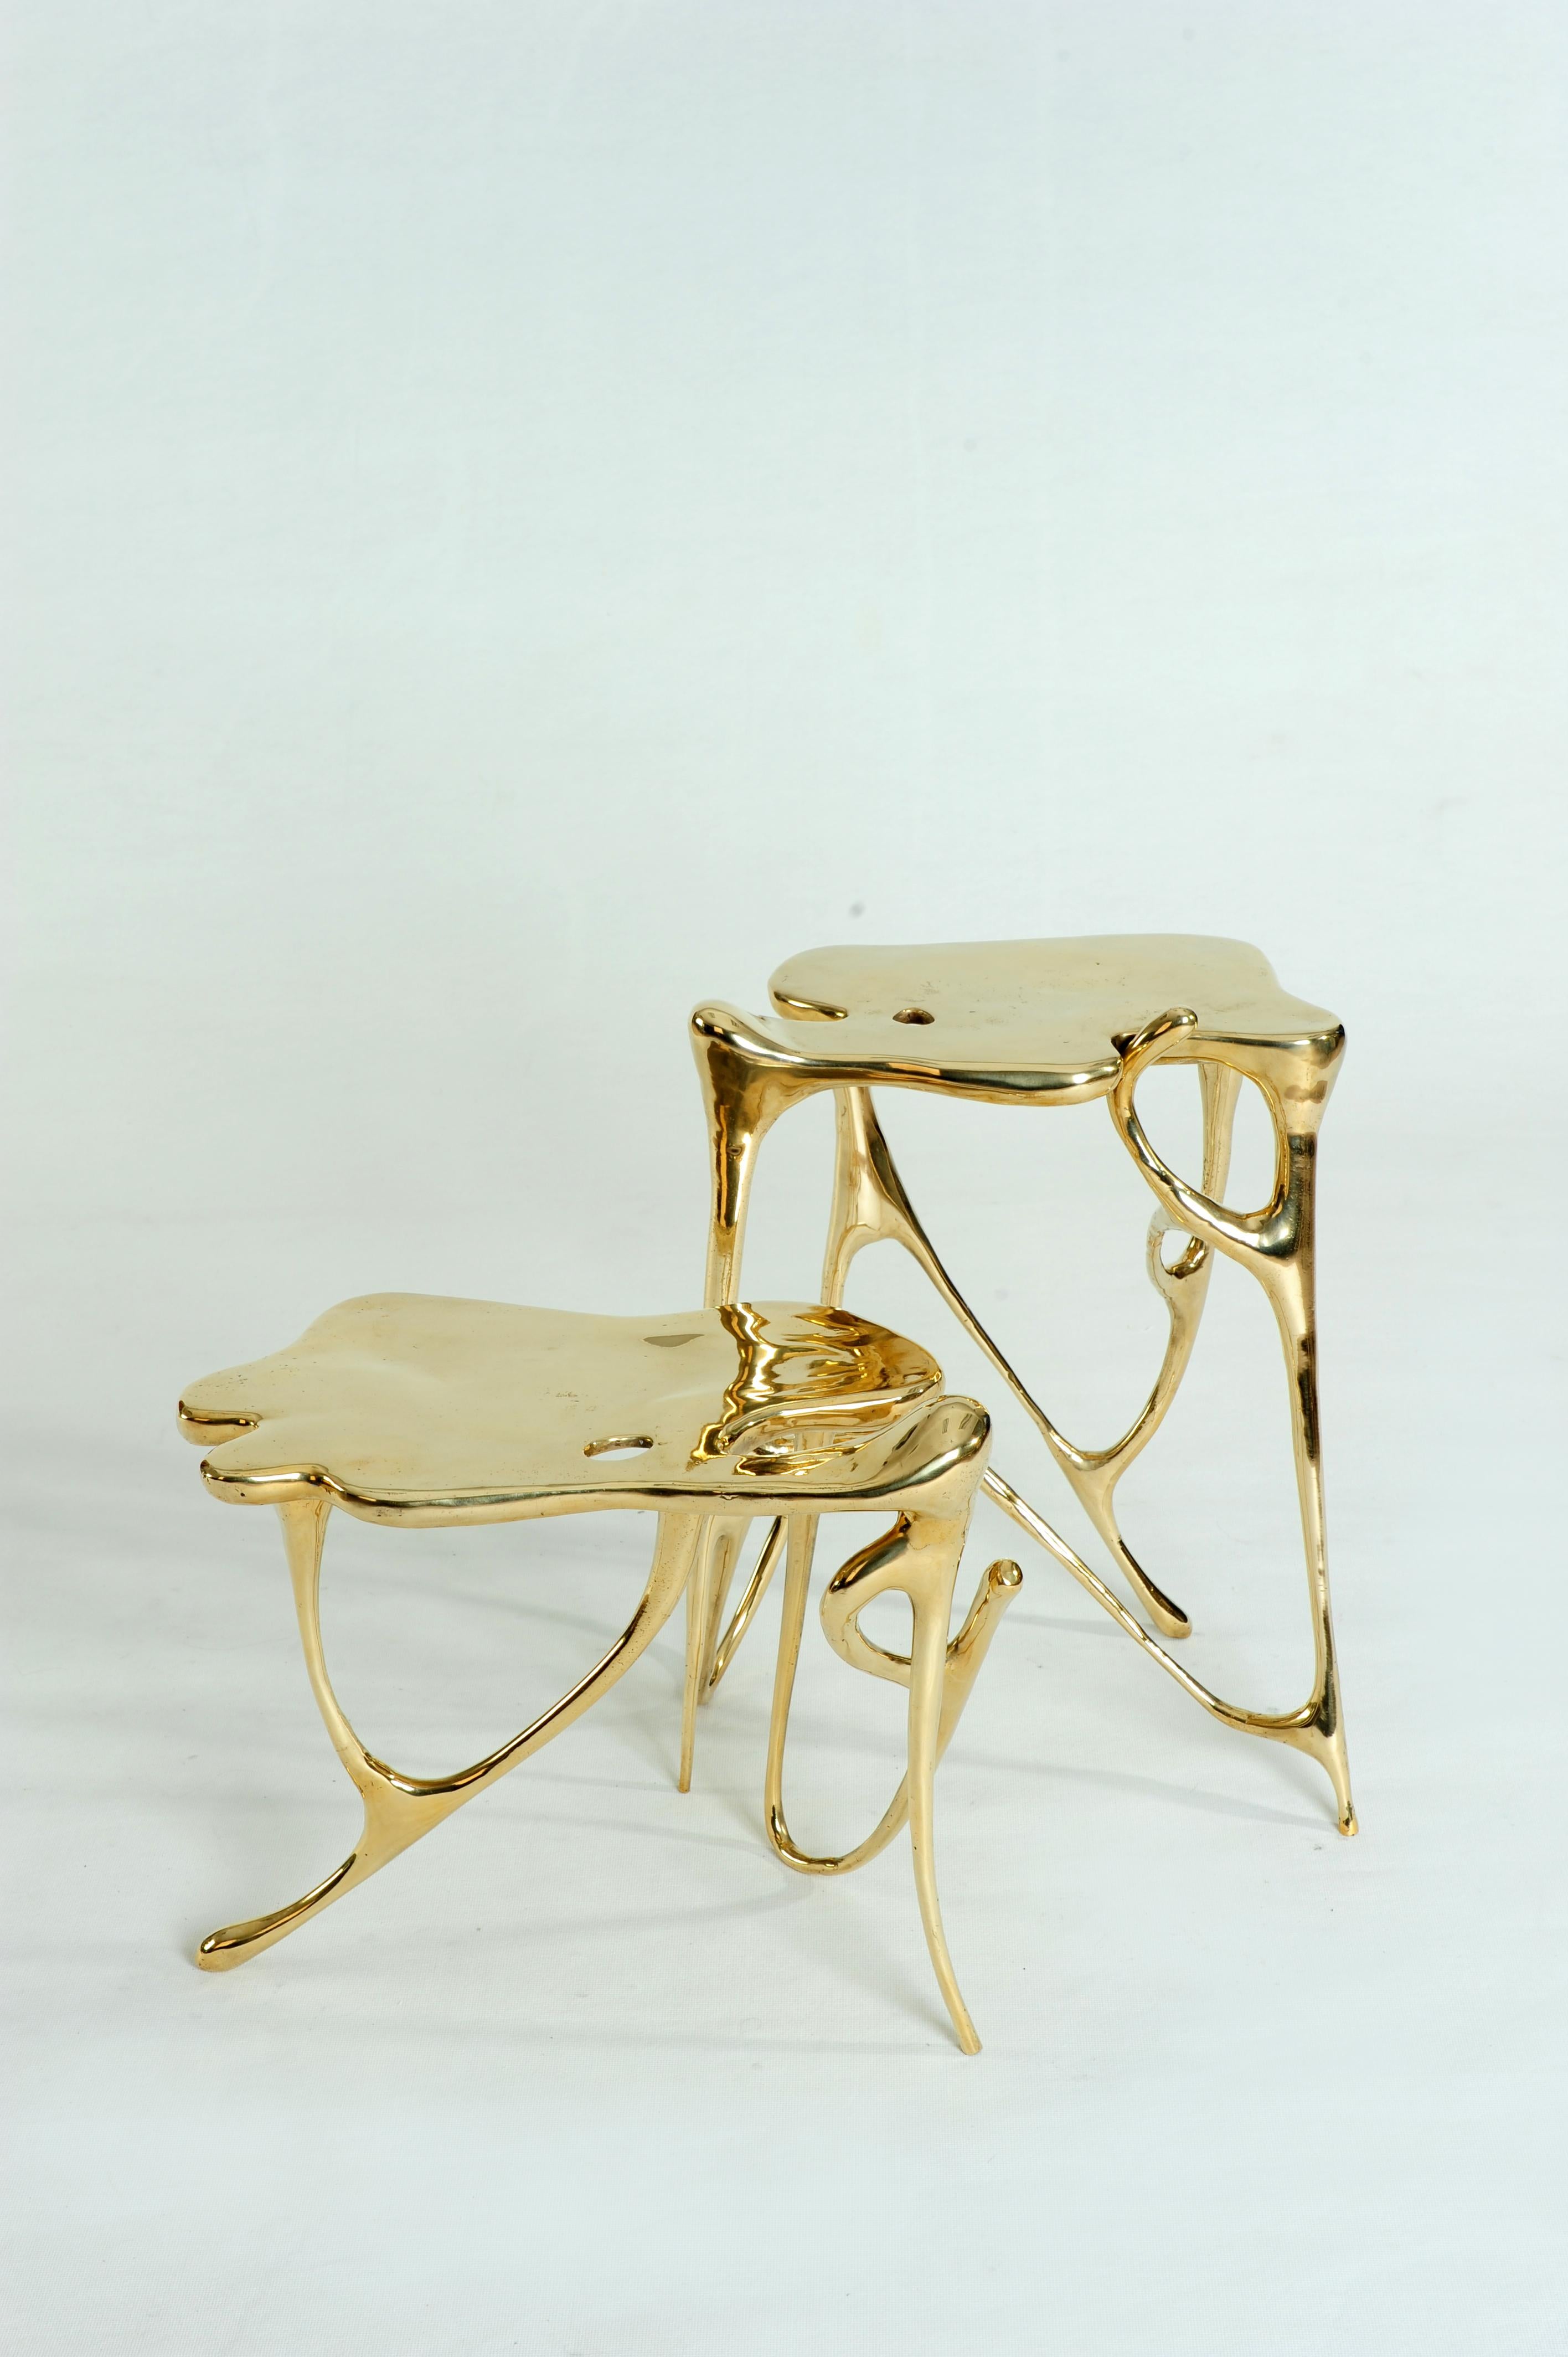 Calligraphic sculpted brass side table by Misaya
Dimensions: W 52 x L 31 x H 41 cm
Hand-sculpted brass table.

Misaya emulates Chinese ink paintings through the process of lost-wax casting.

Each piece in the Ink Collection – which consists of